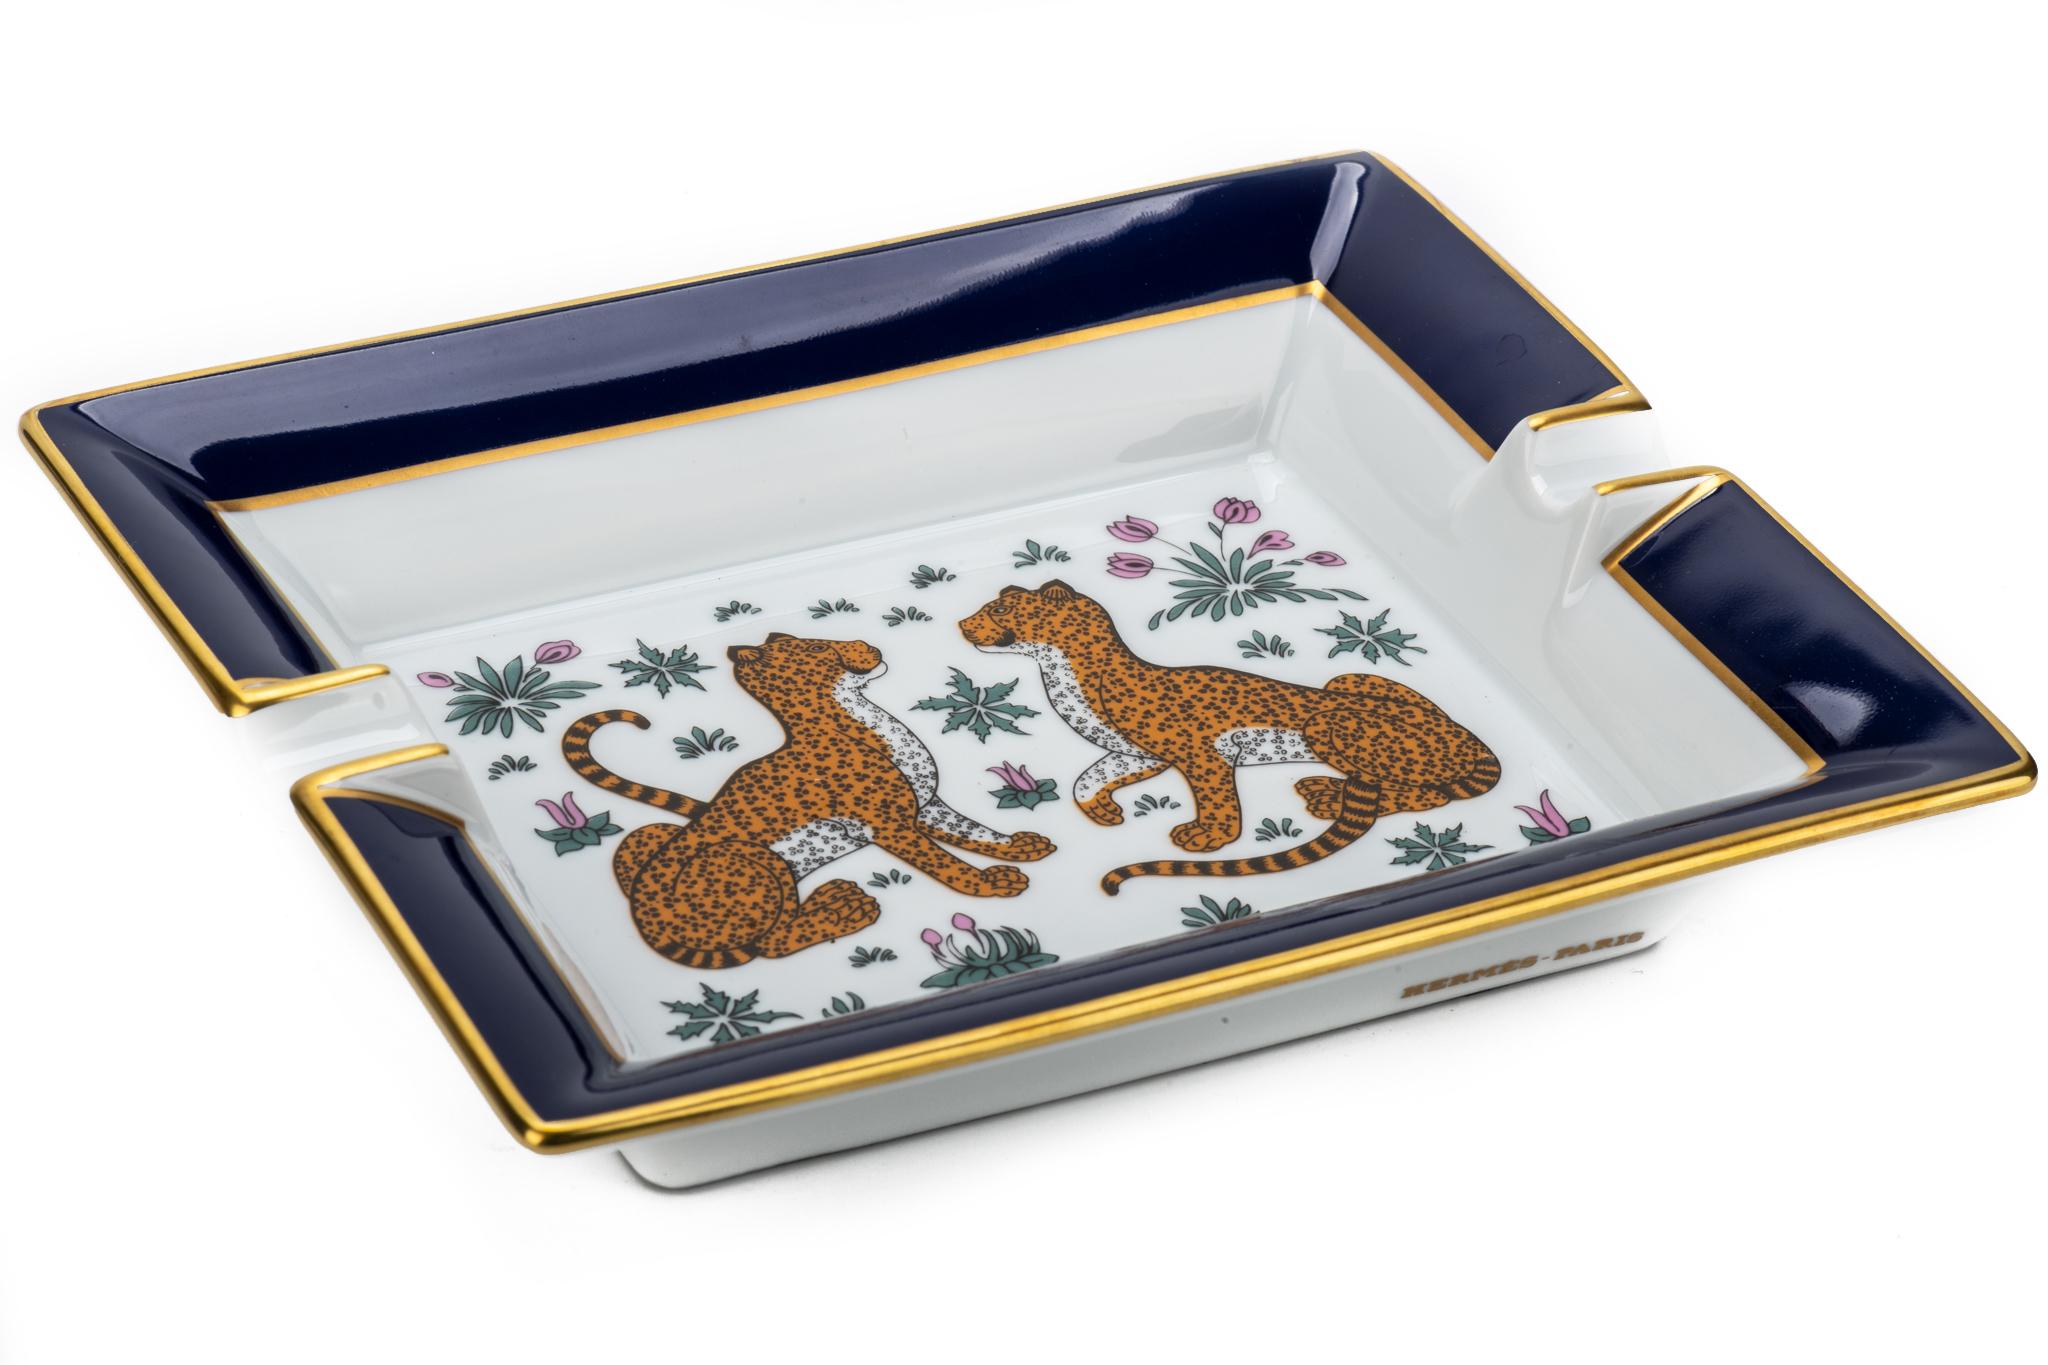 Hermes Blue Guepards Collectible Ashtray In Excellent Condition For Sale In West Hollywood, CA